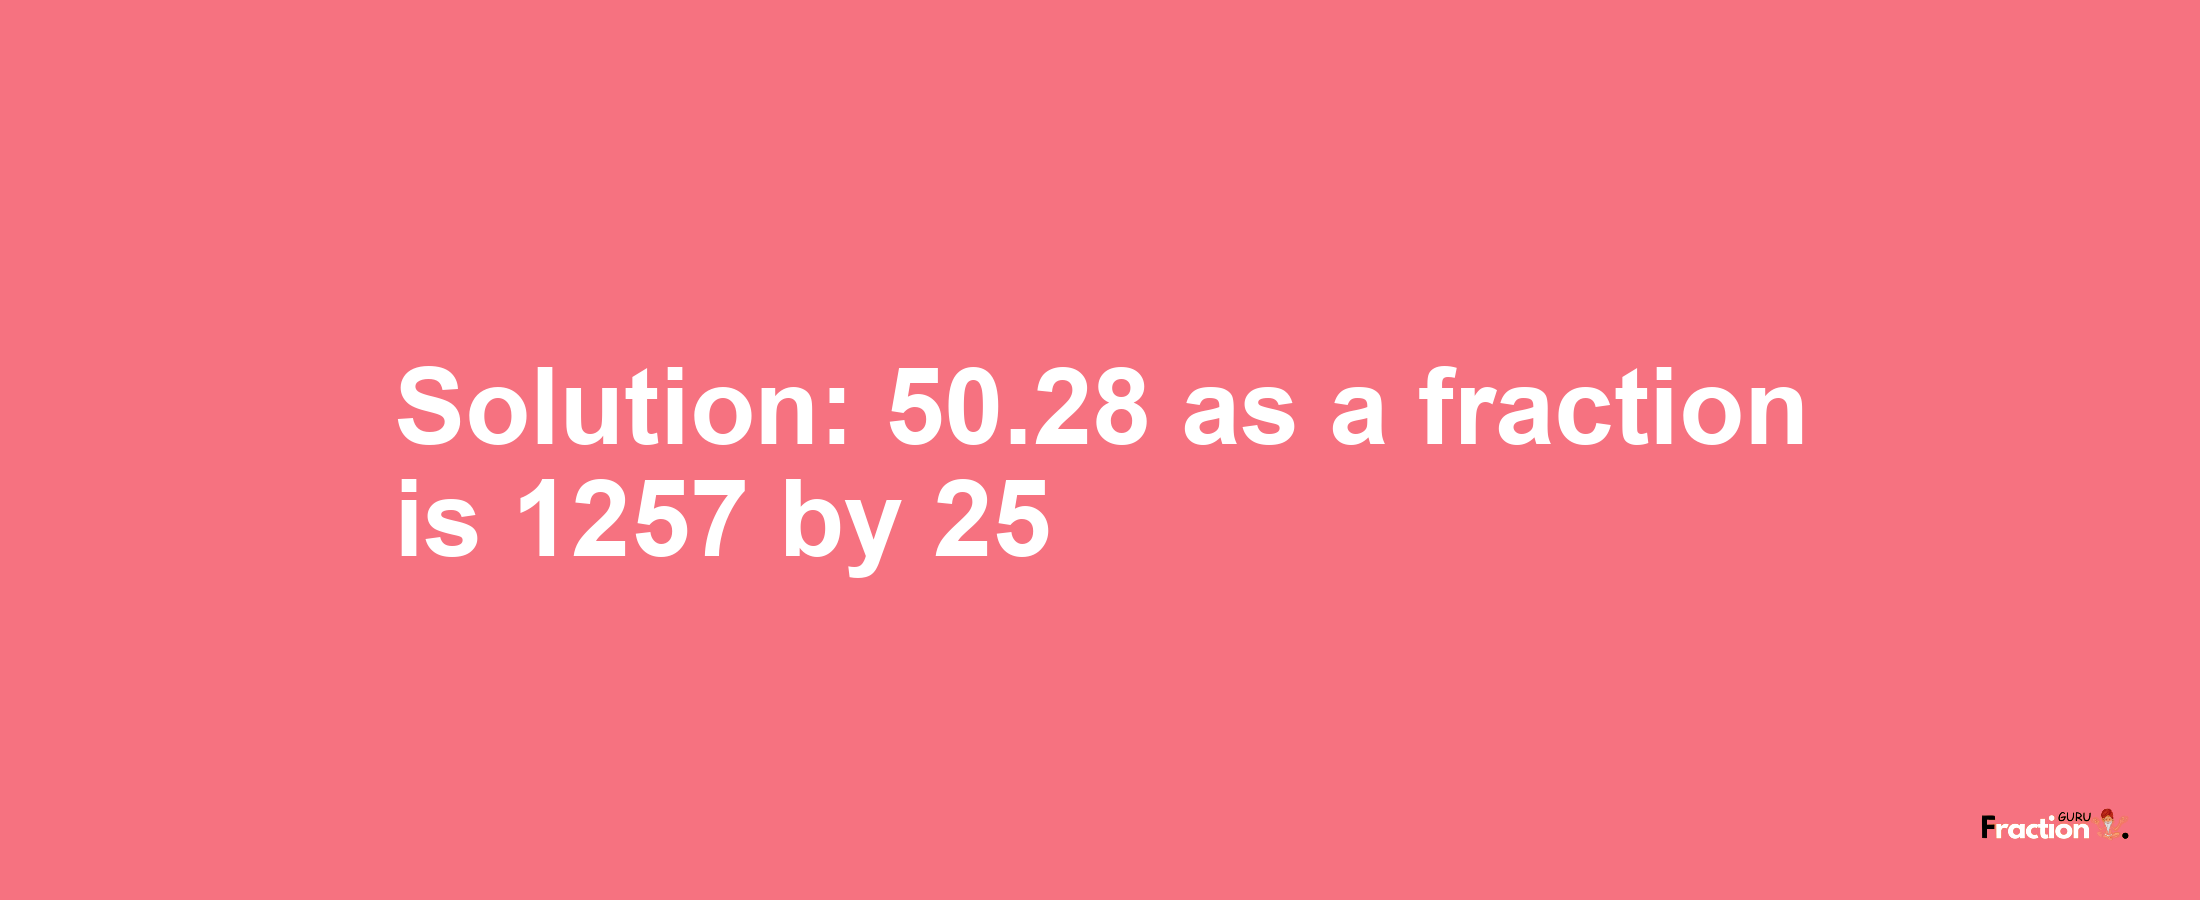 Solution:50.28 as a fraction is 1257/25